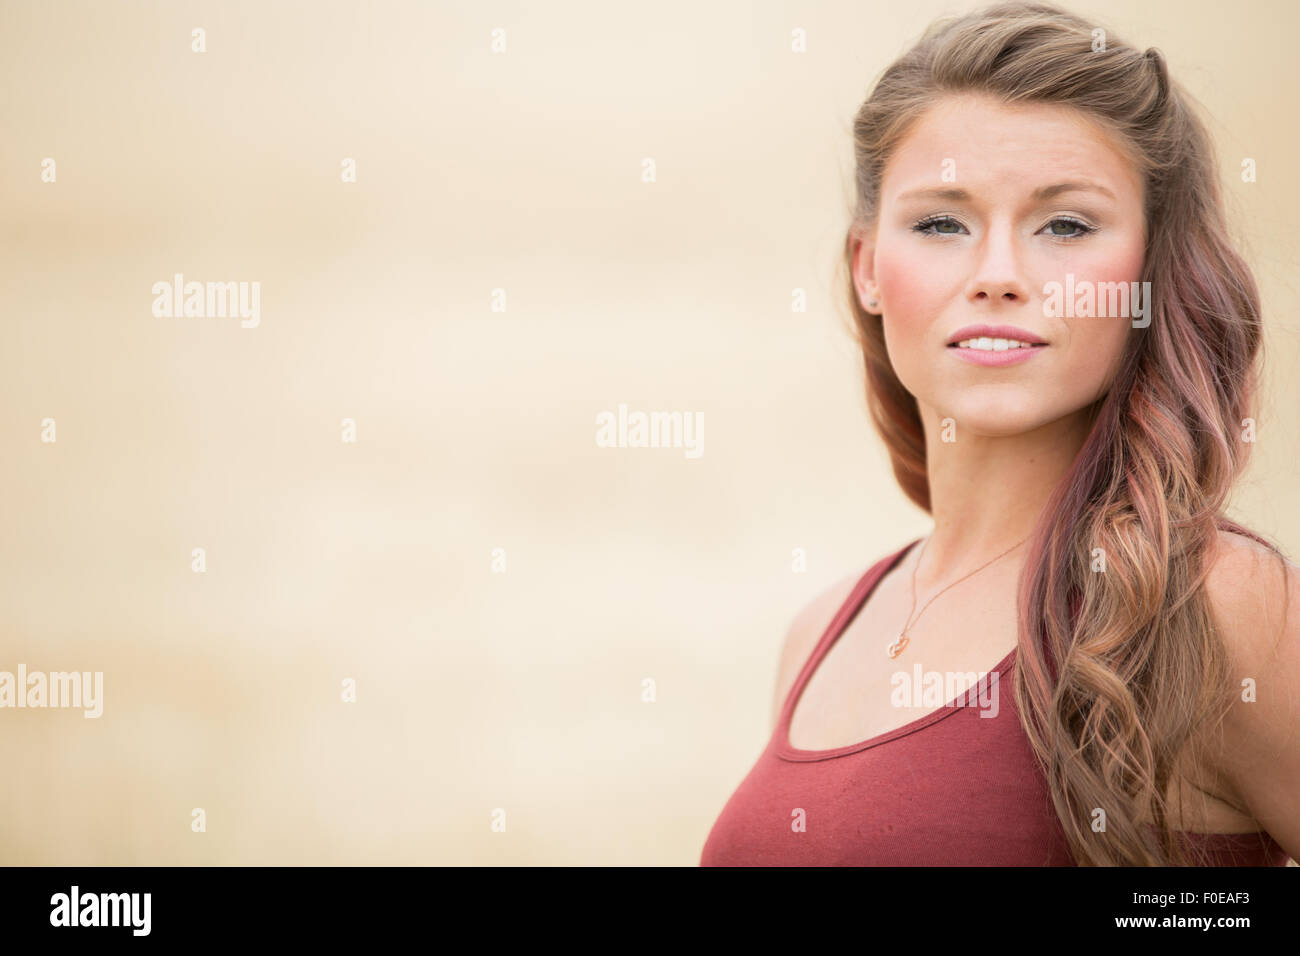 Young woman posing in large wheat field wearing red tank top. Stock Photo